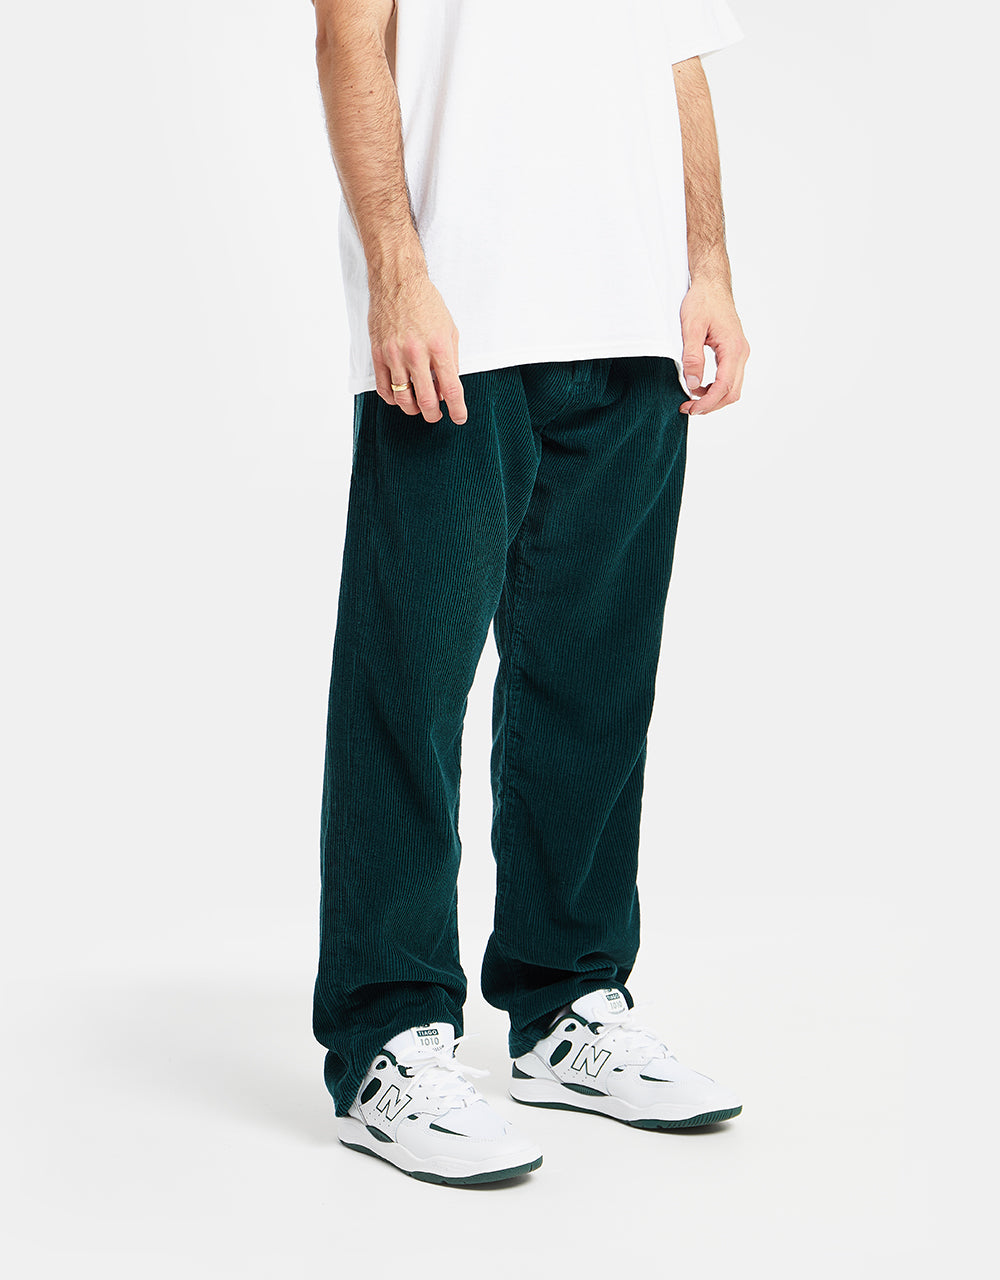 Route One Relaxed Fit Big Wale Cords - Forest Green